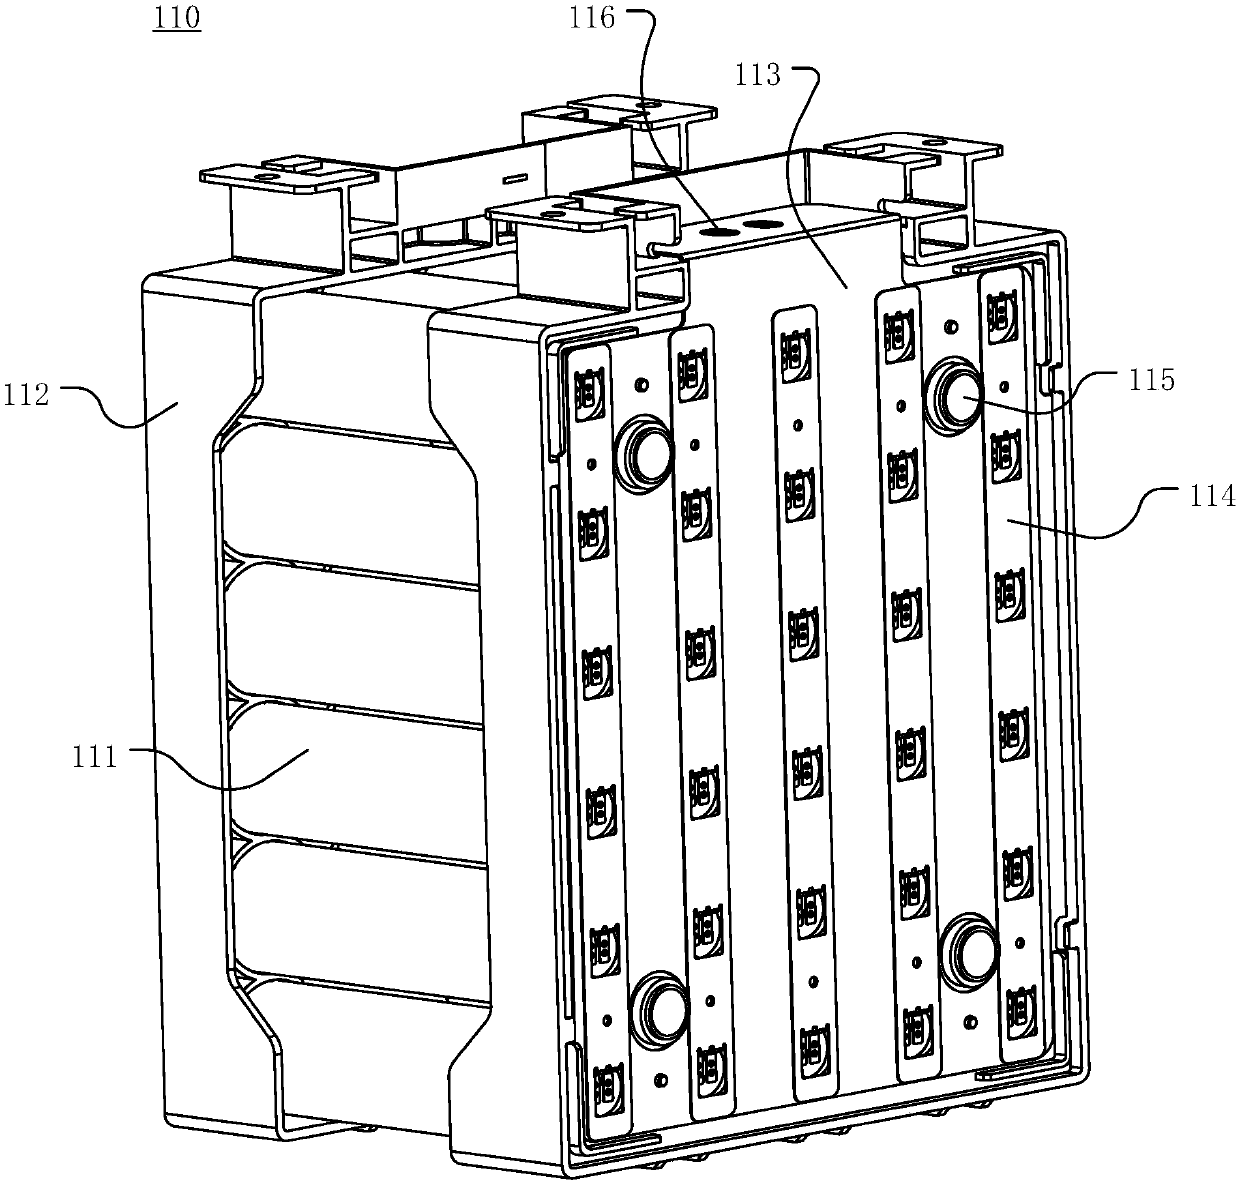 Cylindrical power battery module